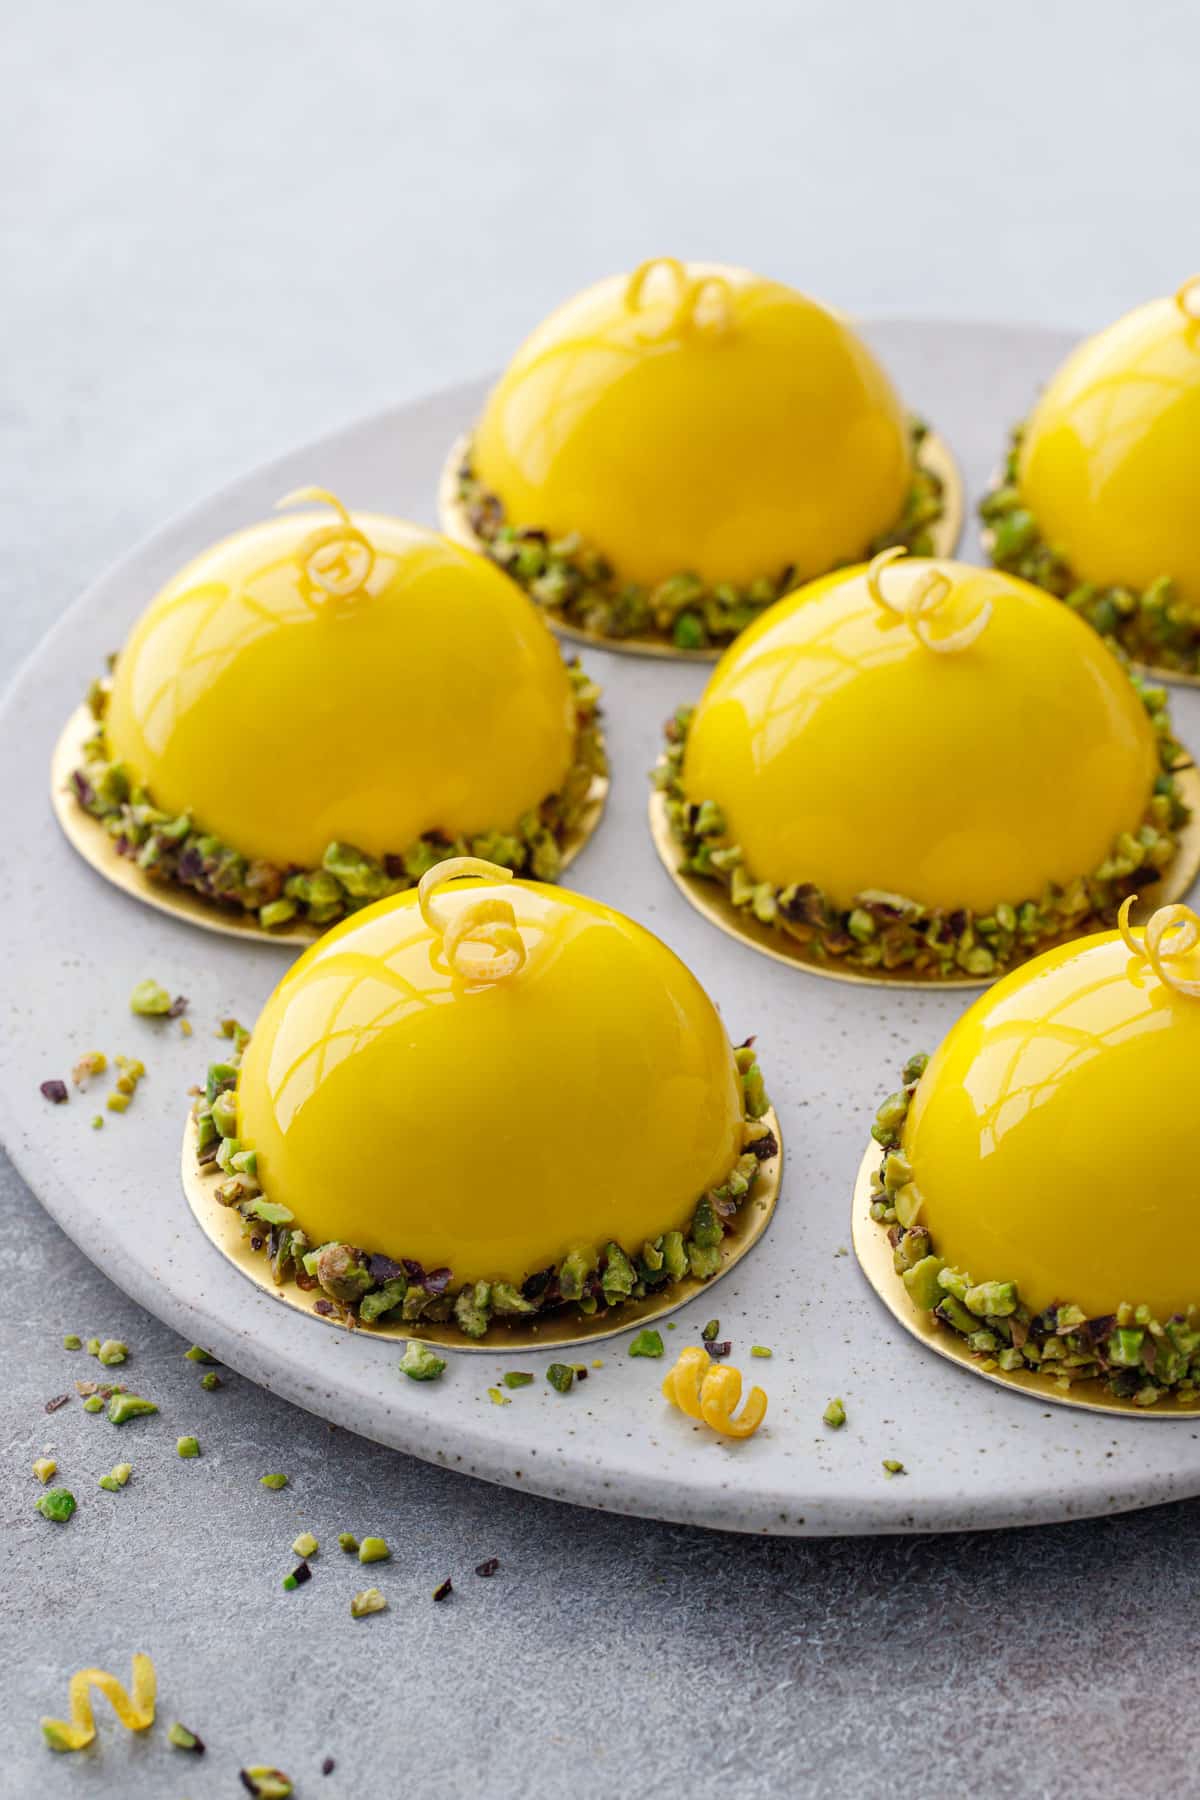 Plate with dome-shaped Pistachio & Meyer Lemon Mousse Cakes with bright yellow shiny mirror glaze.